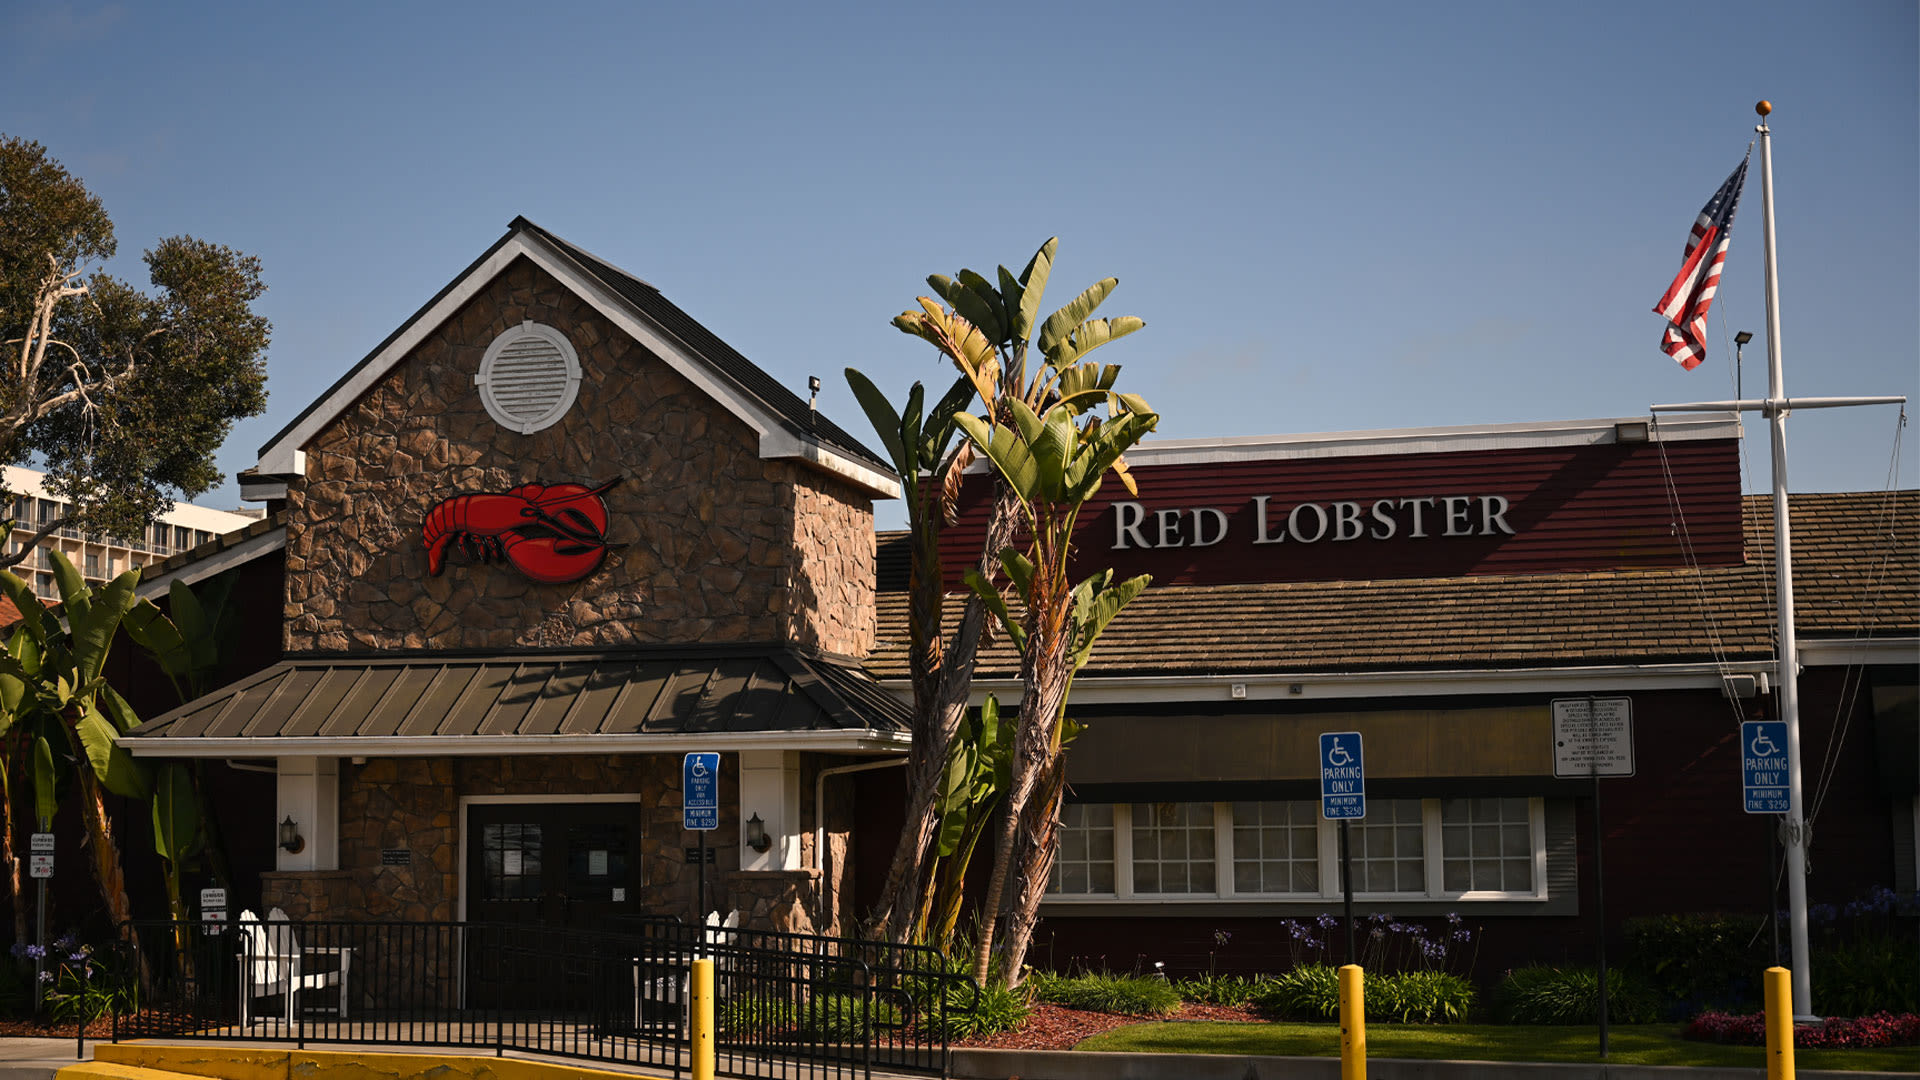 Red Lobster ‘will file for bankruptcy in days’ - after shocking signs appear